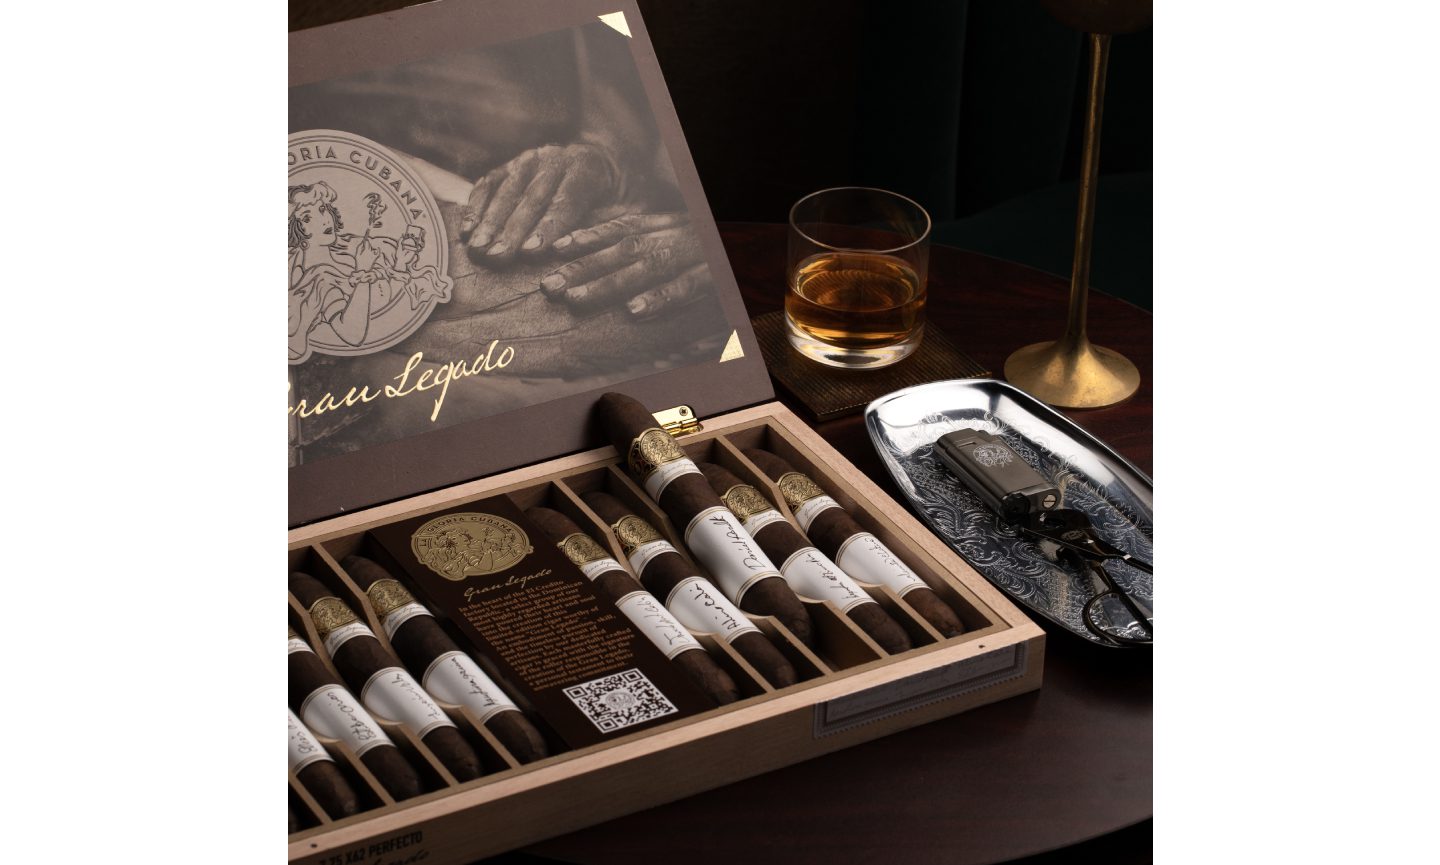 la-gloria-cubana-releases-cigar-honoring-the-artisans-who-crafted-it